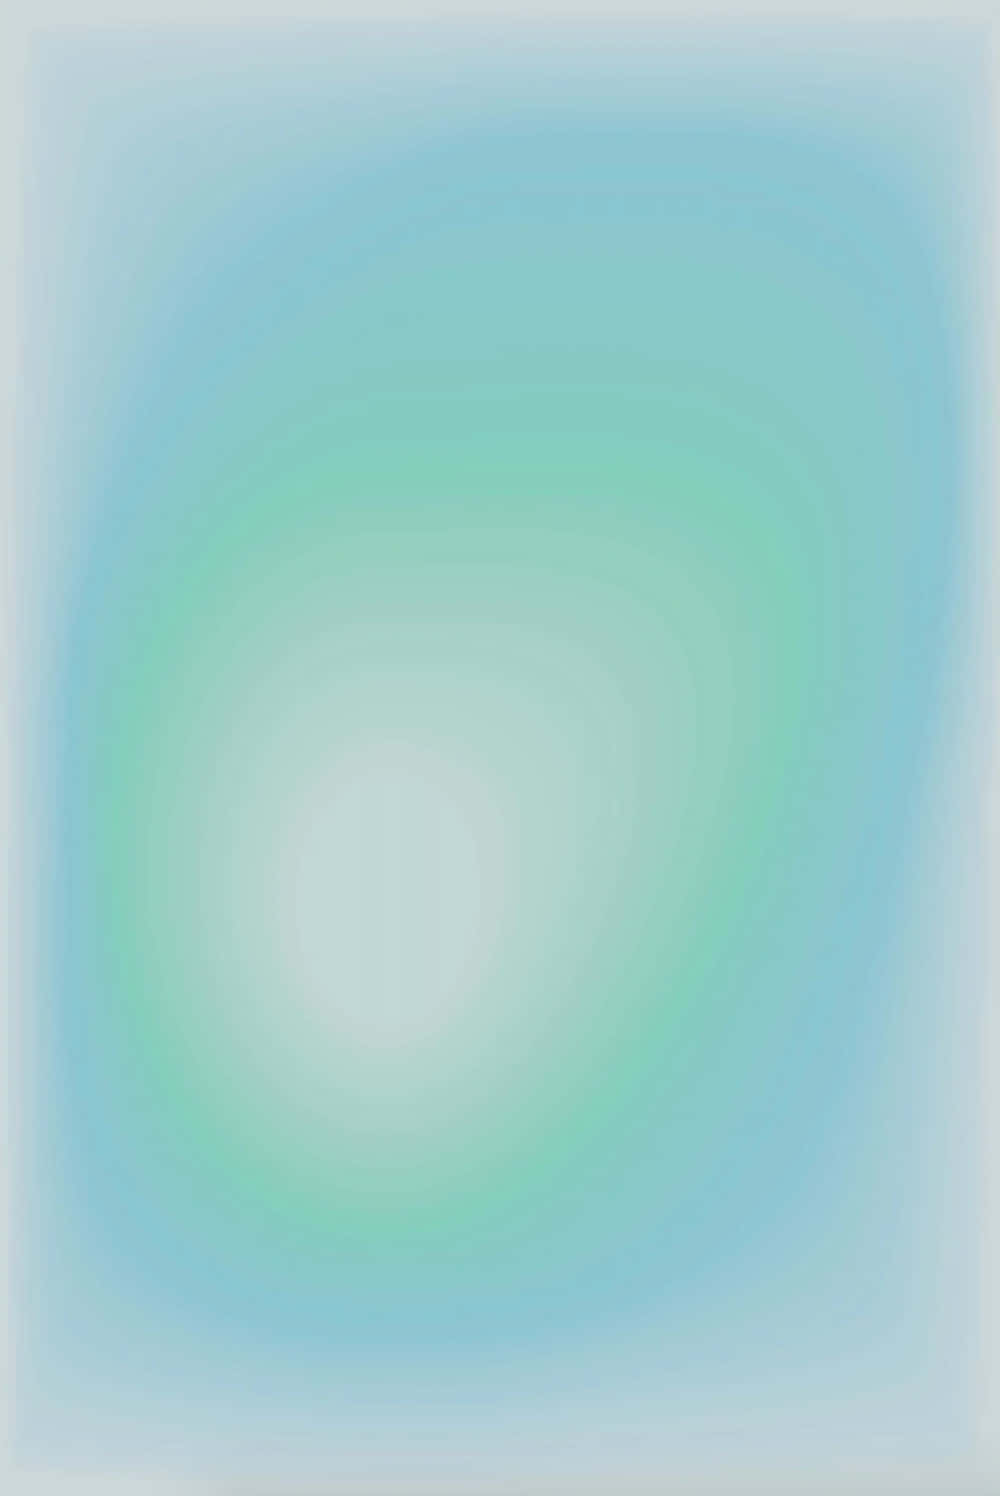 A Blue And Green Abstract Painting On A White Background Wallpaper